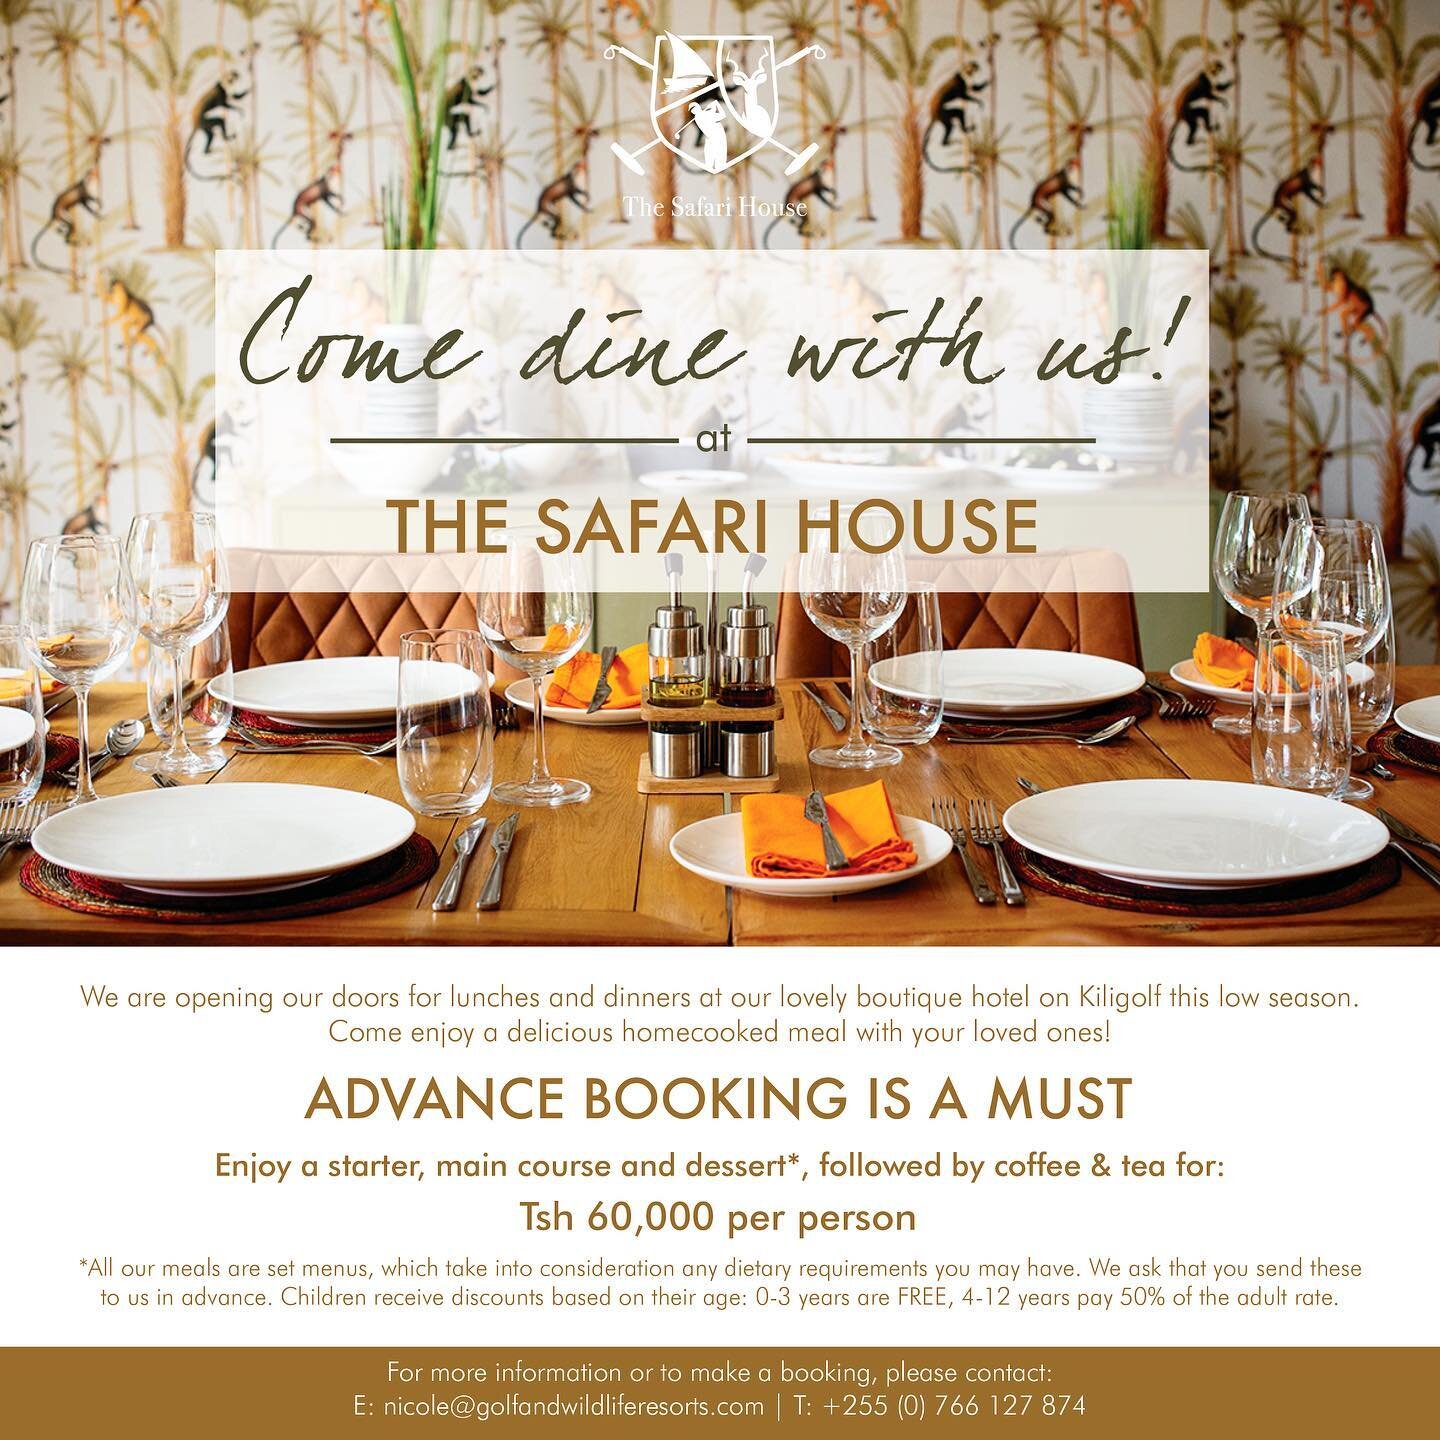 𝓒𝓸𝓶𝓮 𝓭𝓲𝓷𝓮 𝔀𝓲𝓽𝓱 𝓾𝓼! 🍽️

The Safari House is opening its doors for lunches and dinners this low season. Come enjoy a delicious homecooked meal with your loved ones!

𝗔𝗱𝘃𝗮𝗻𝗰𝗲 𝗕𝗼𝗼𝗸𝗶𝗻𝗴 𝗥𝗲𝗾𝘂𝗶𝗿𝗲𝗱

Enjoy a starter, main c